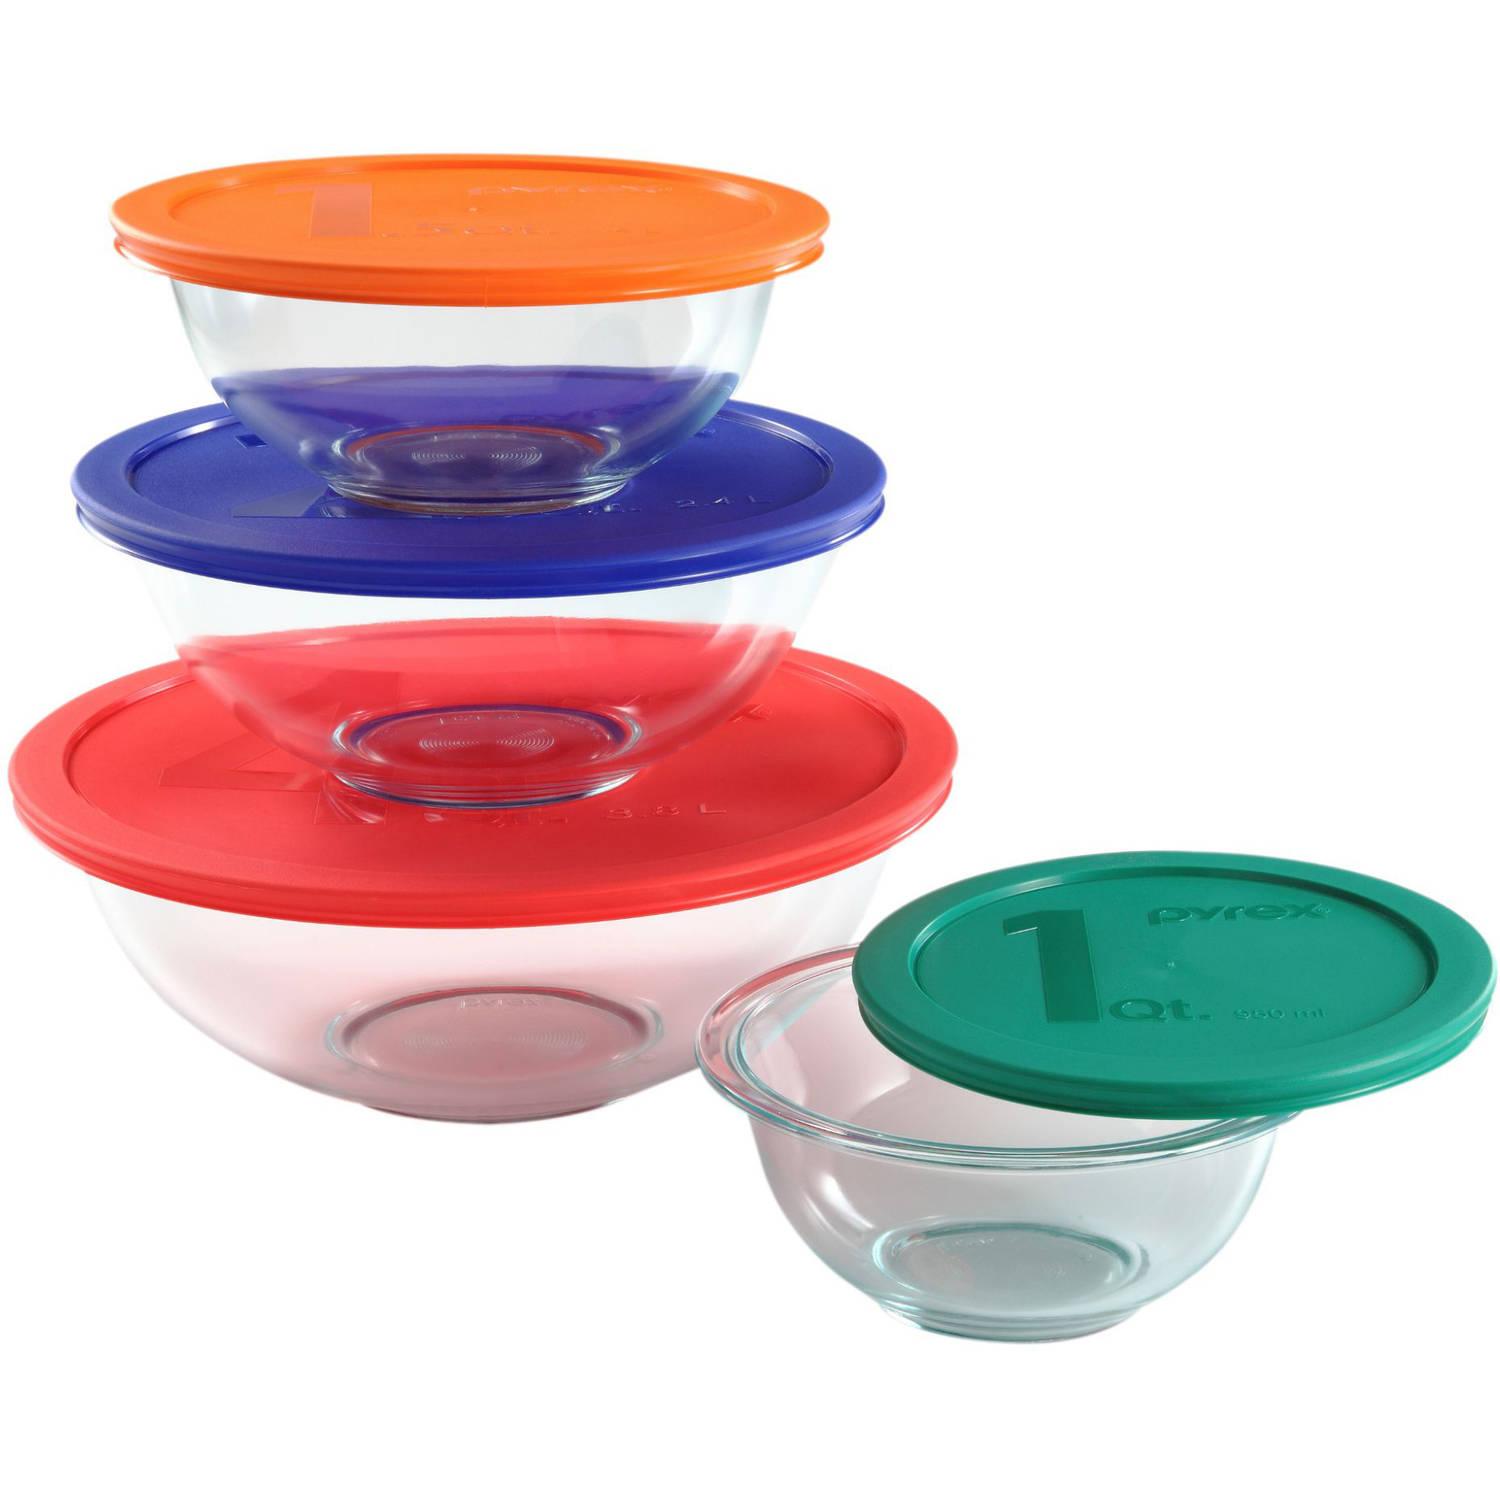 8-Piece Pyrex Glass Mixing and Storage Sets for $15.99